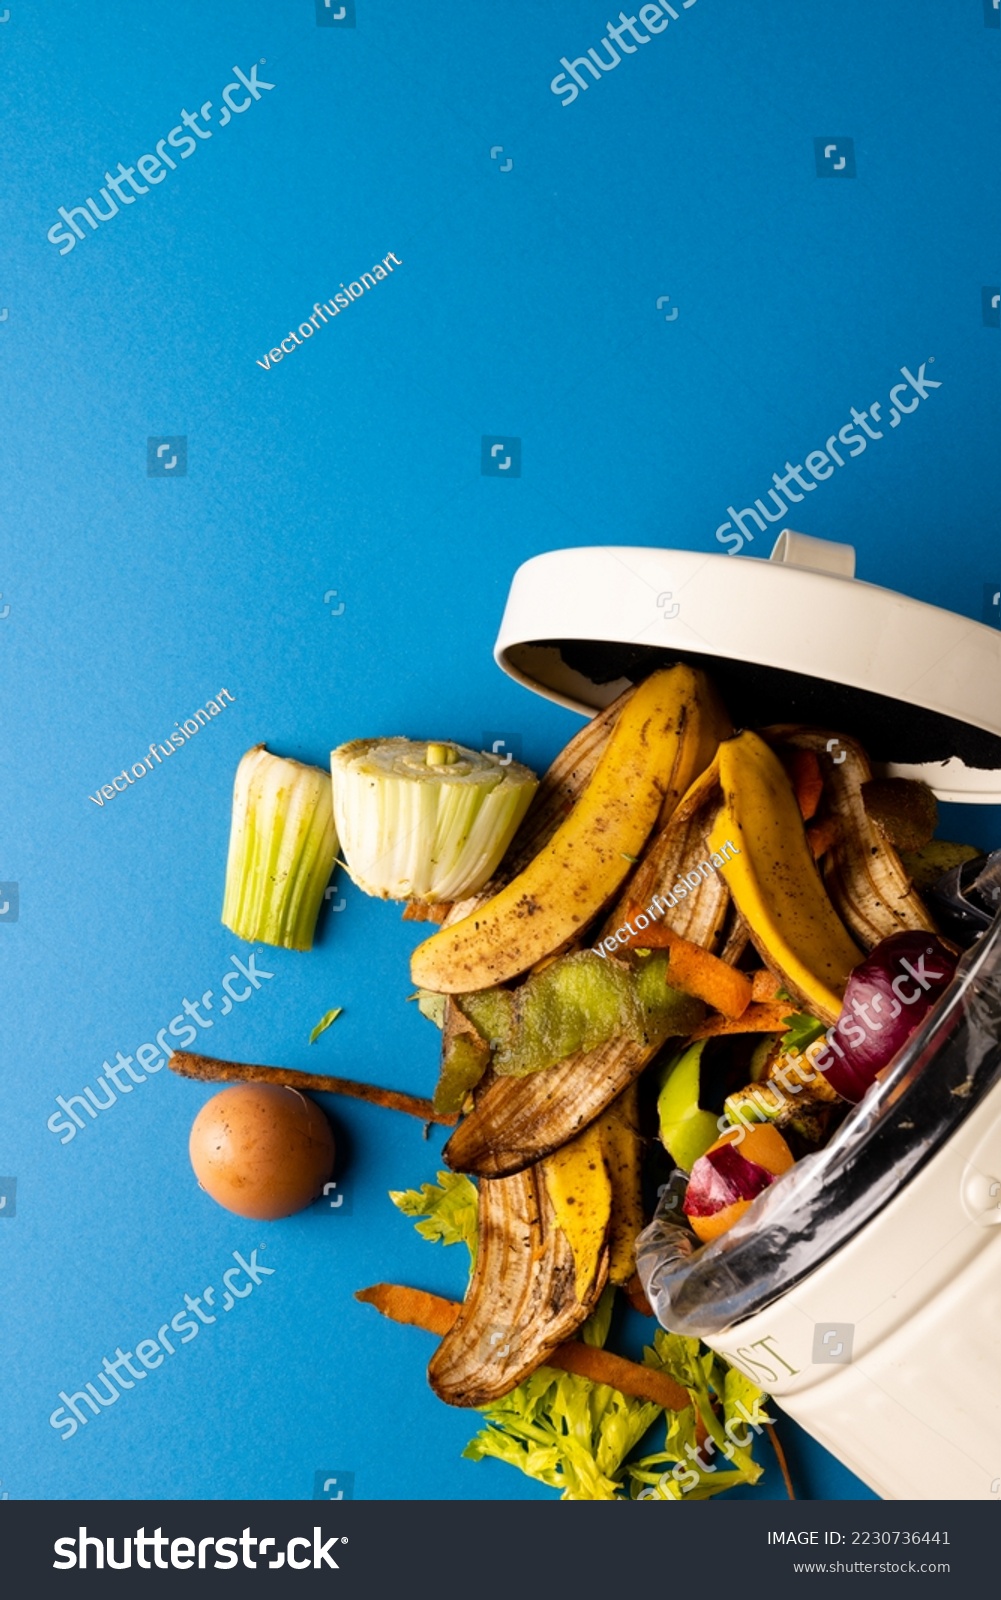 Vertical image of organic fruit and vegetable food waste spilling from open kitchen composting bin. On blue background with copy space. Ecology, recycling, care and nature concept. #2230736441